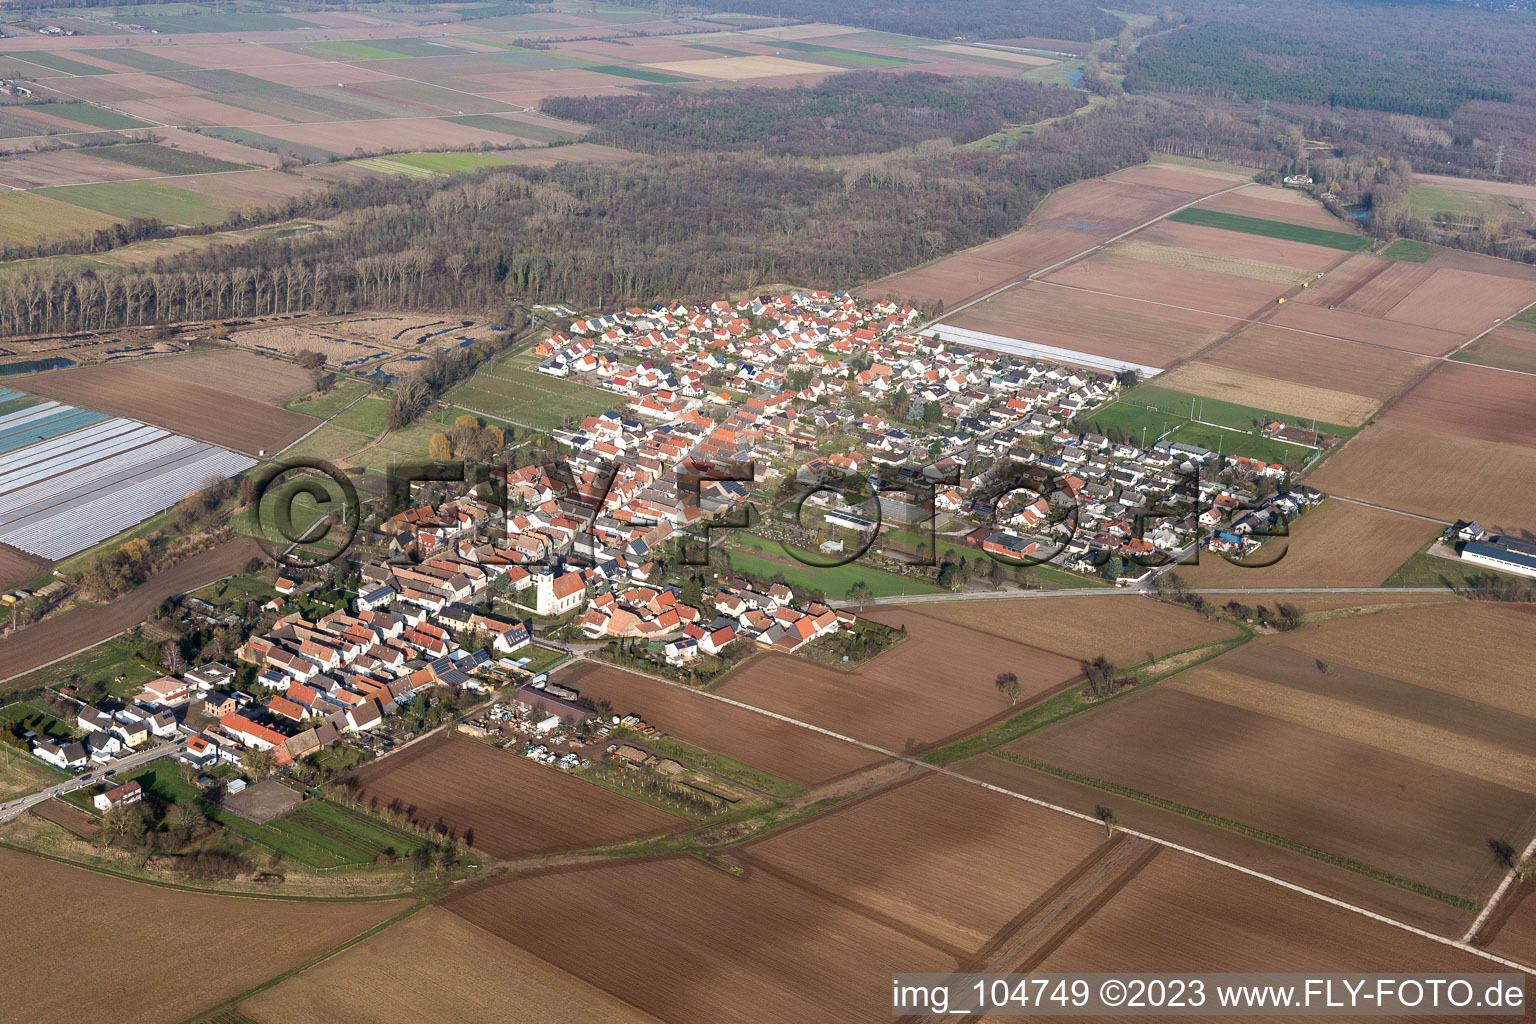 Freisbach in the state Rhineland-Palatinate, Germany out of the air